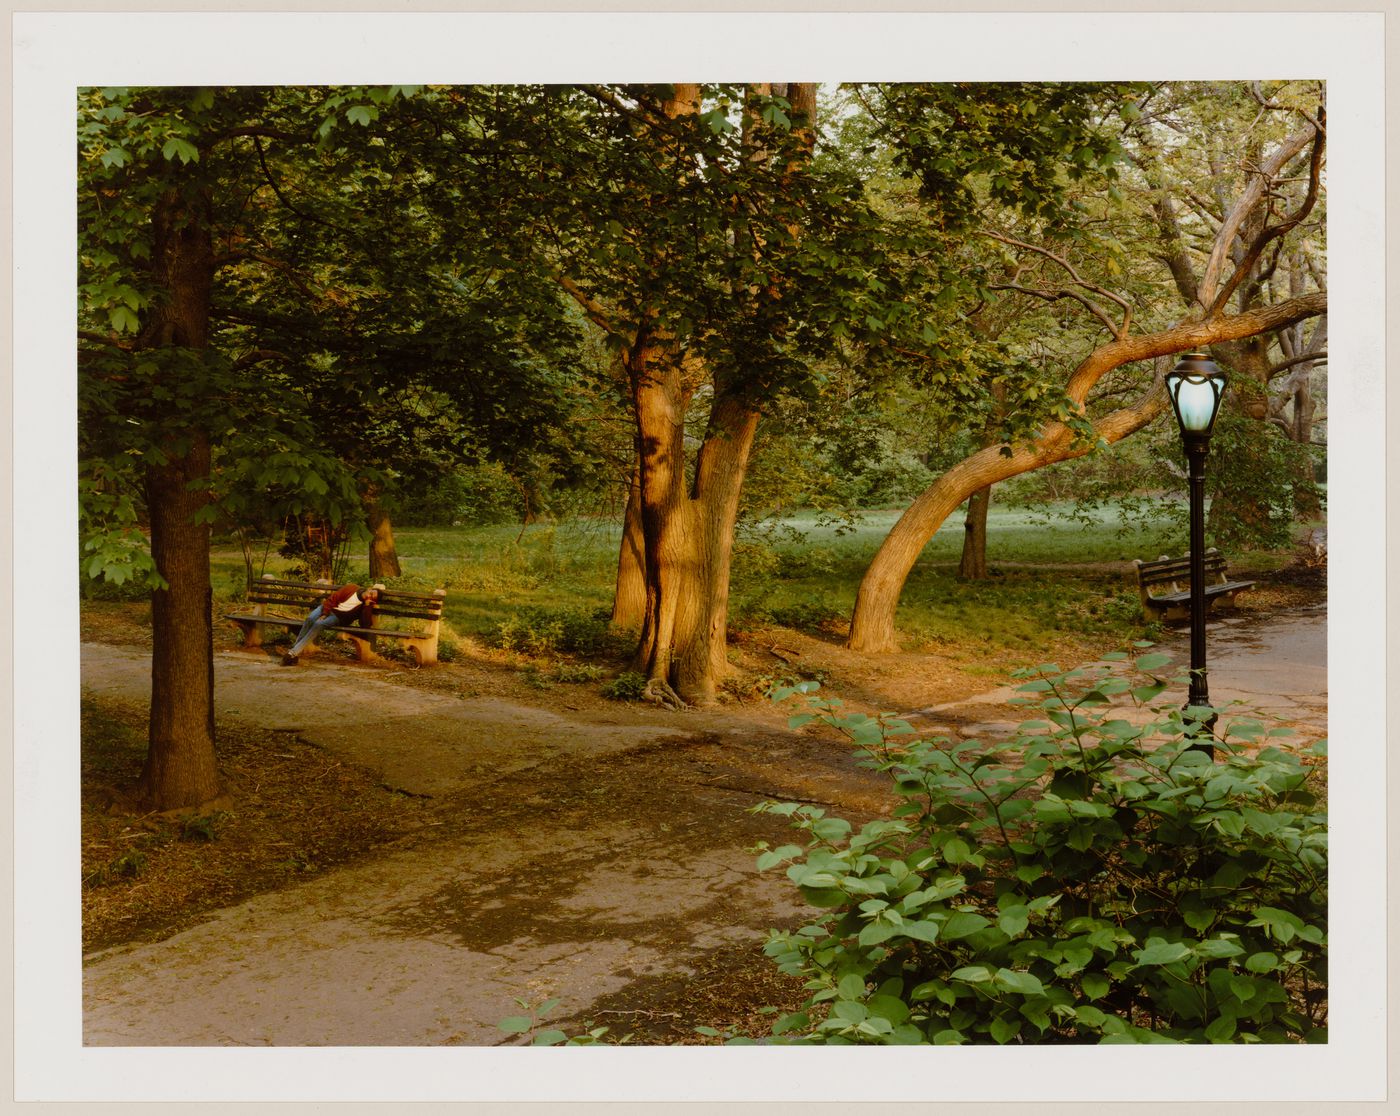 Viewing Olmsted: View of path with trees, The Ramble, Central Park, New York City, New York